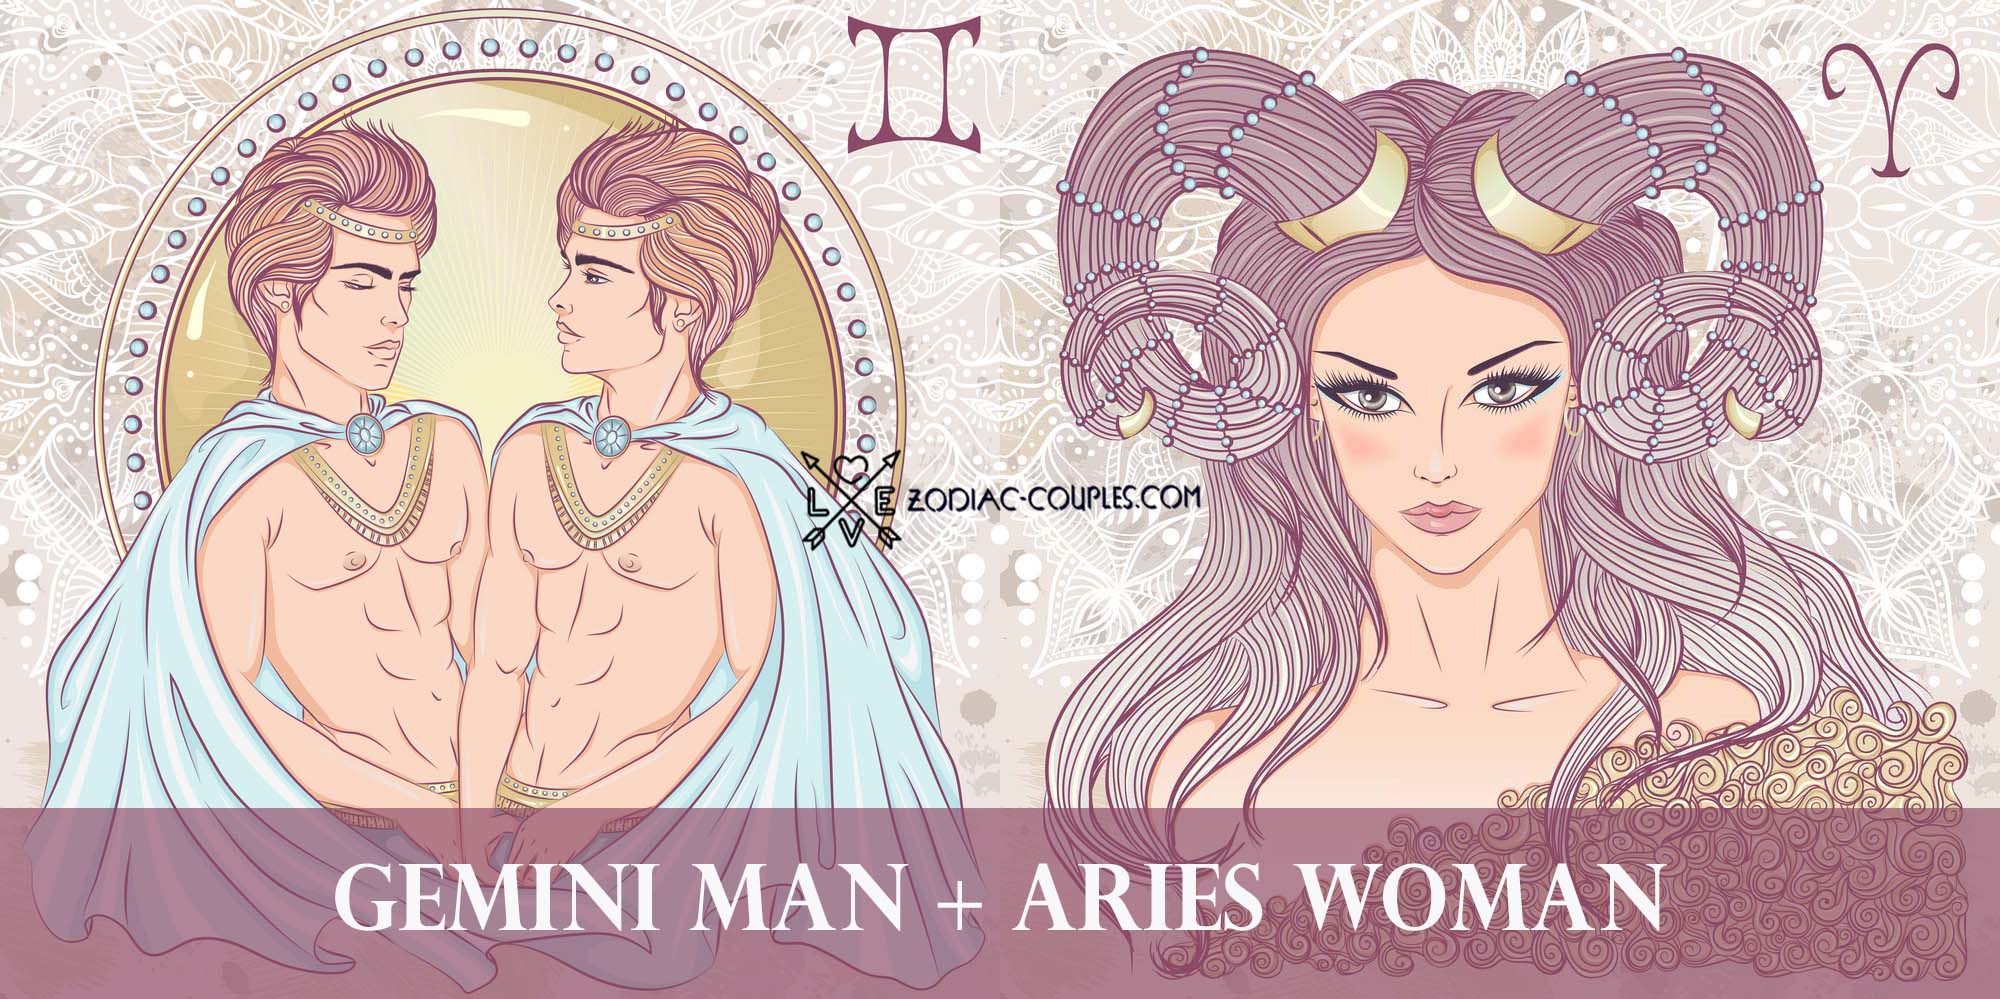 aries man and gemini woman sexually compatible